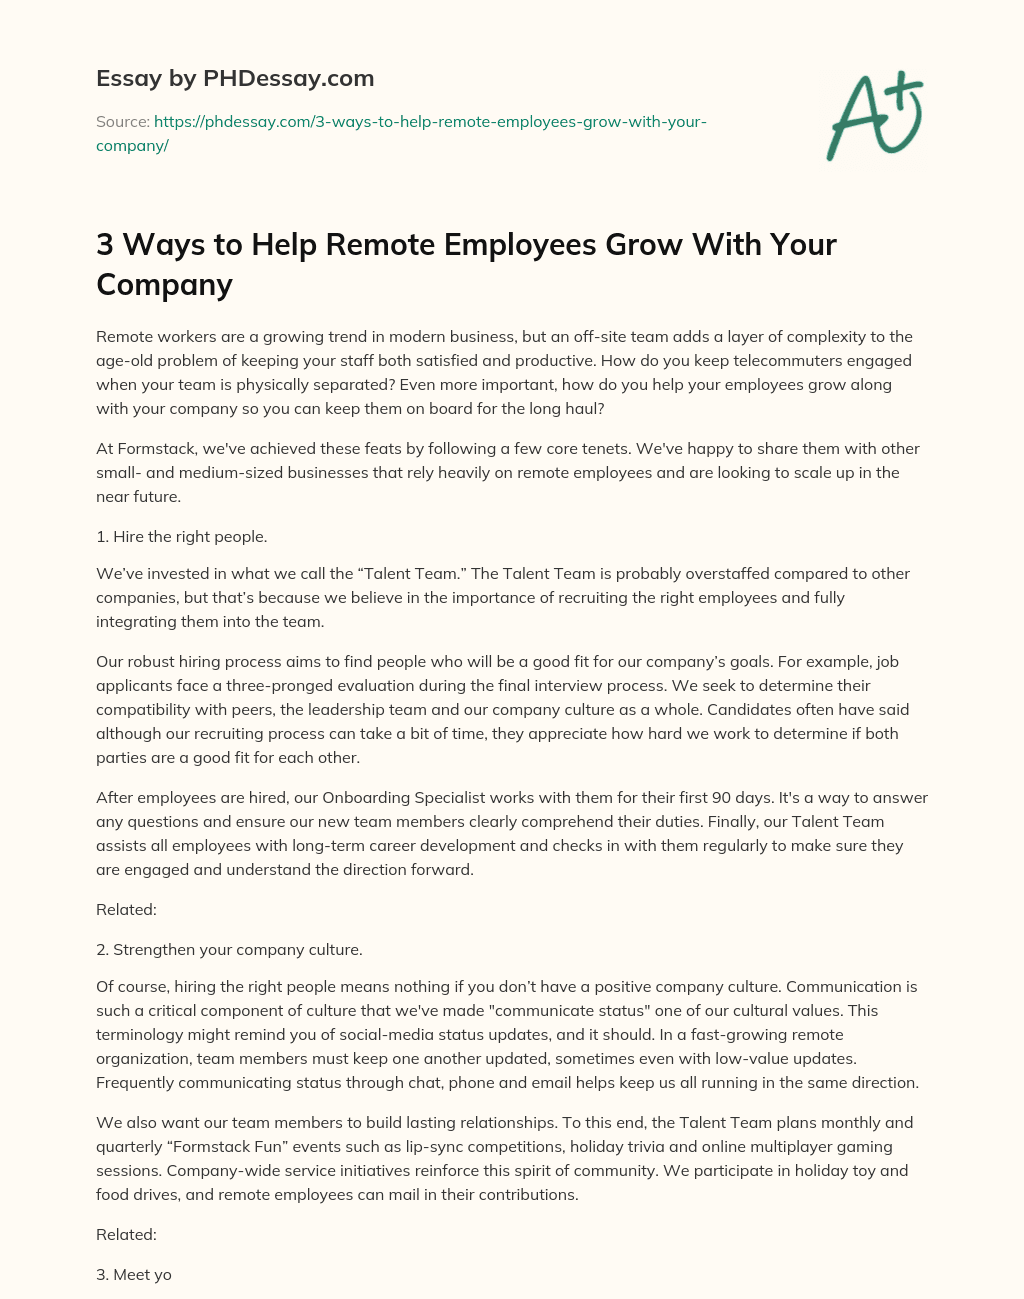 3 Ways to Help Remote Employees Grow With Your Company essay